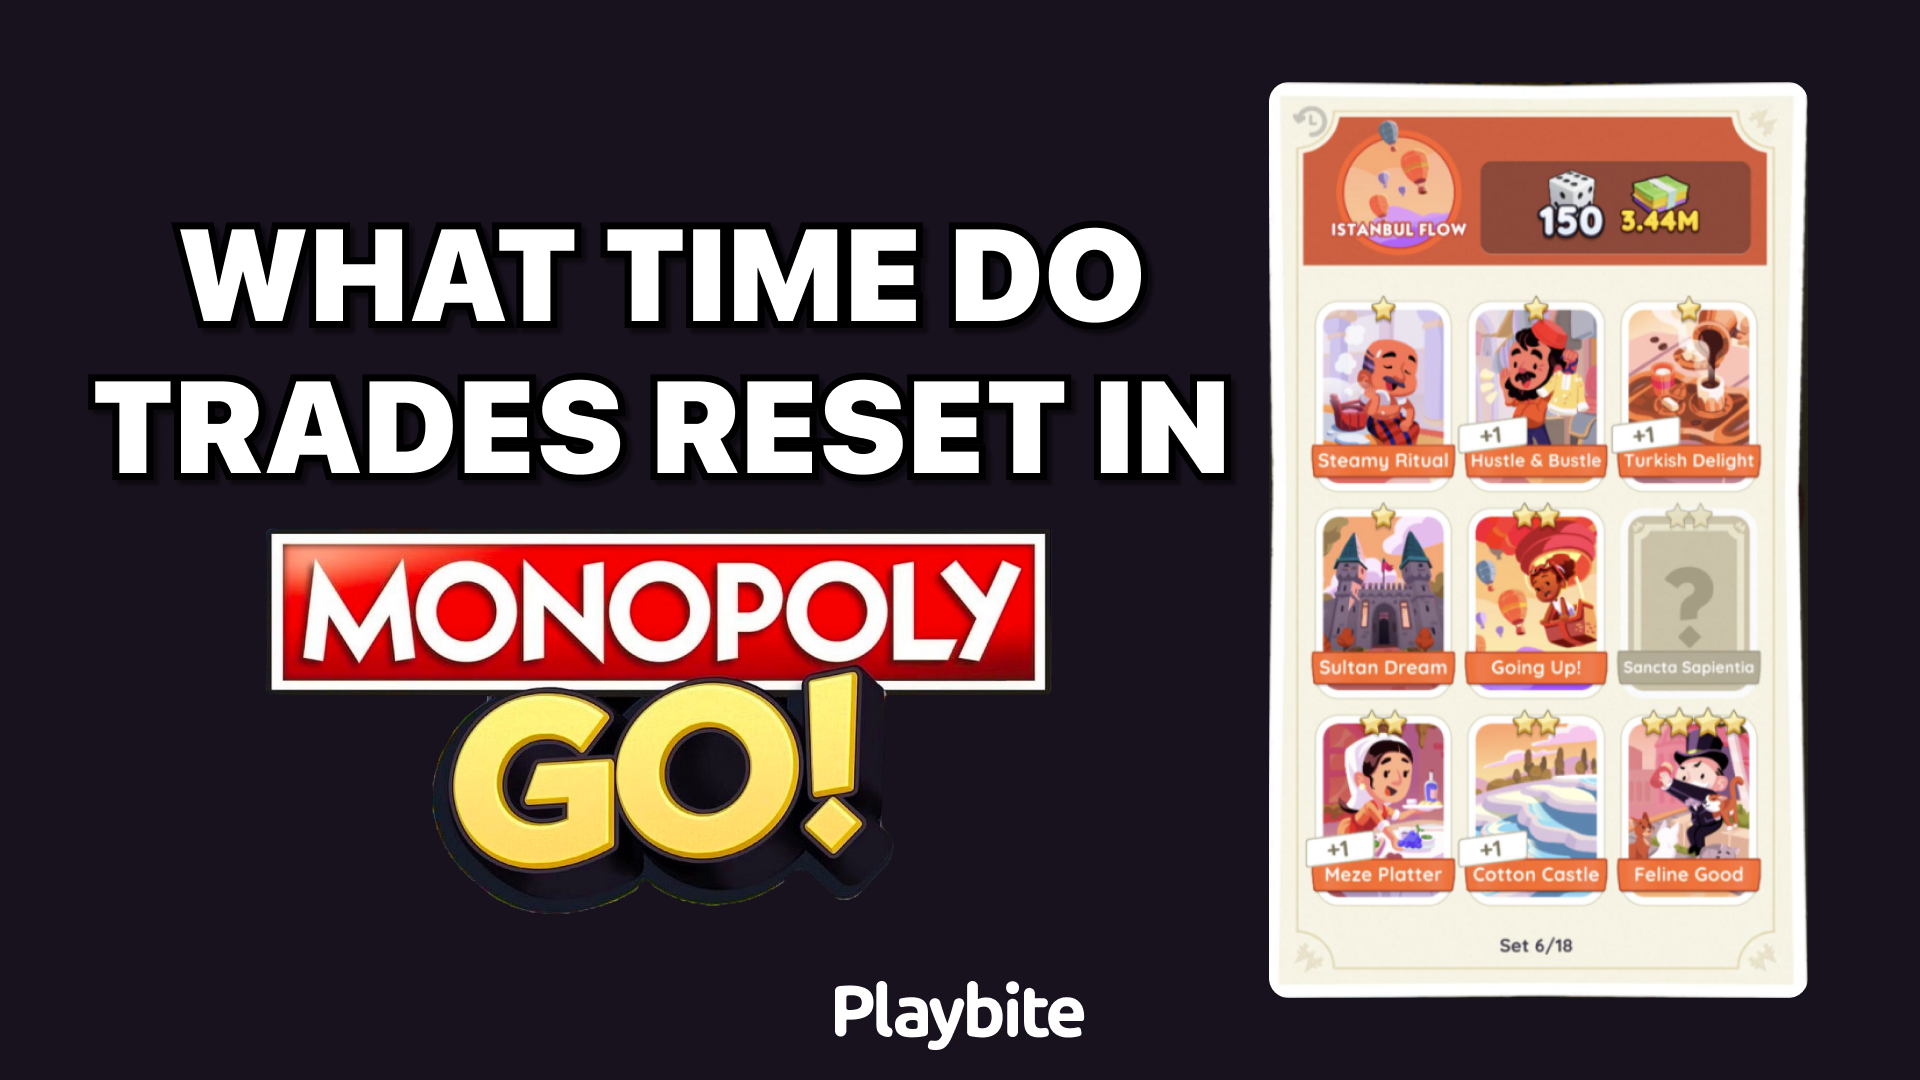 What Time Do Trades Reset in Monopoly Go?